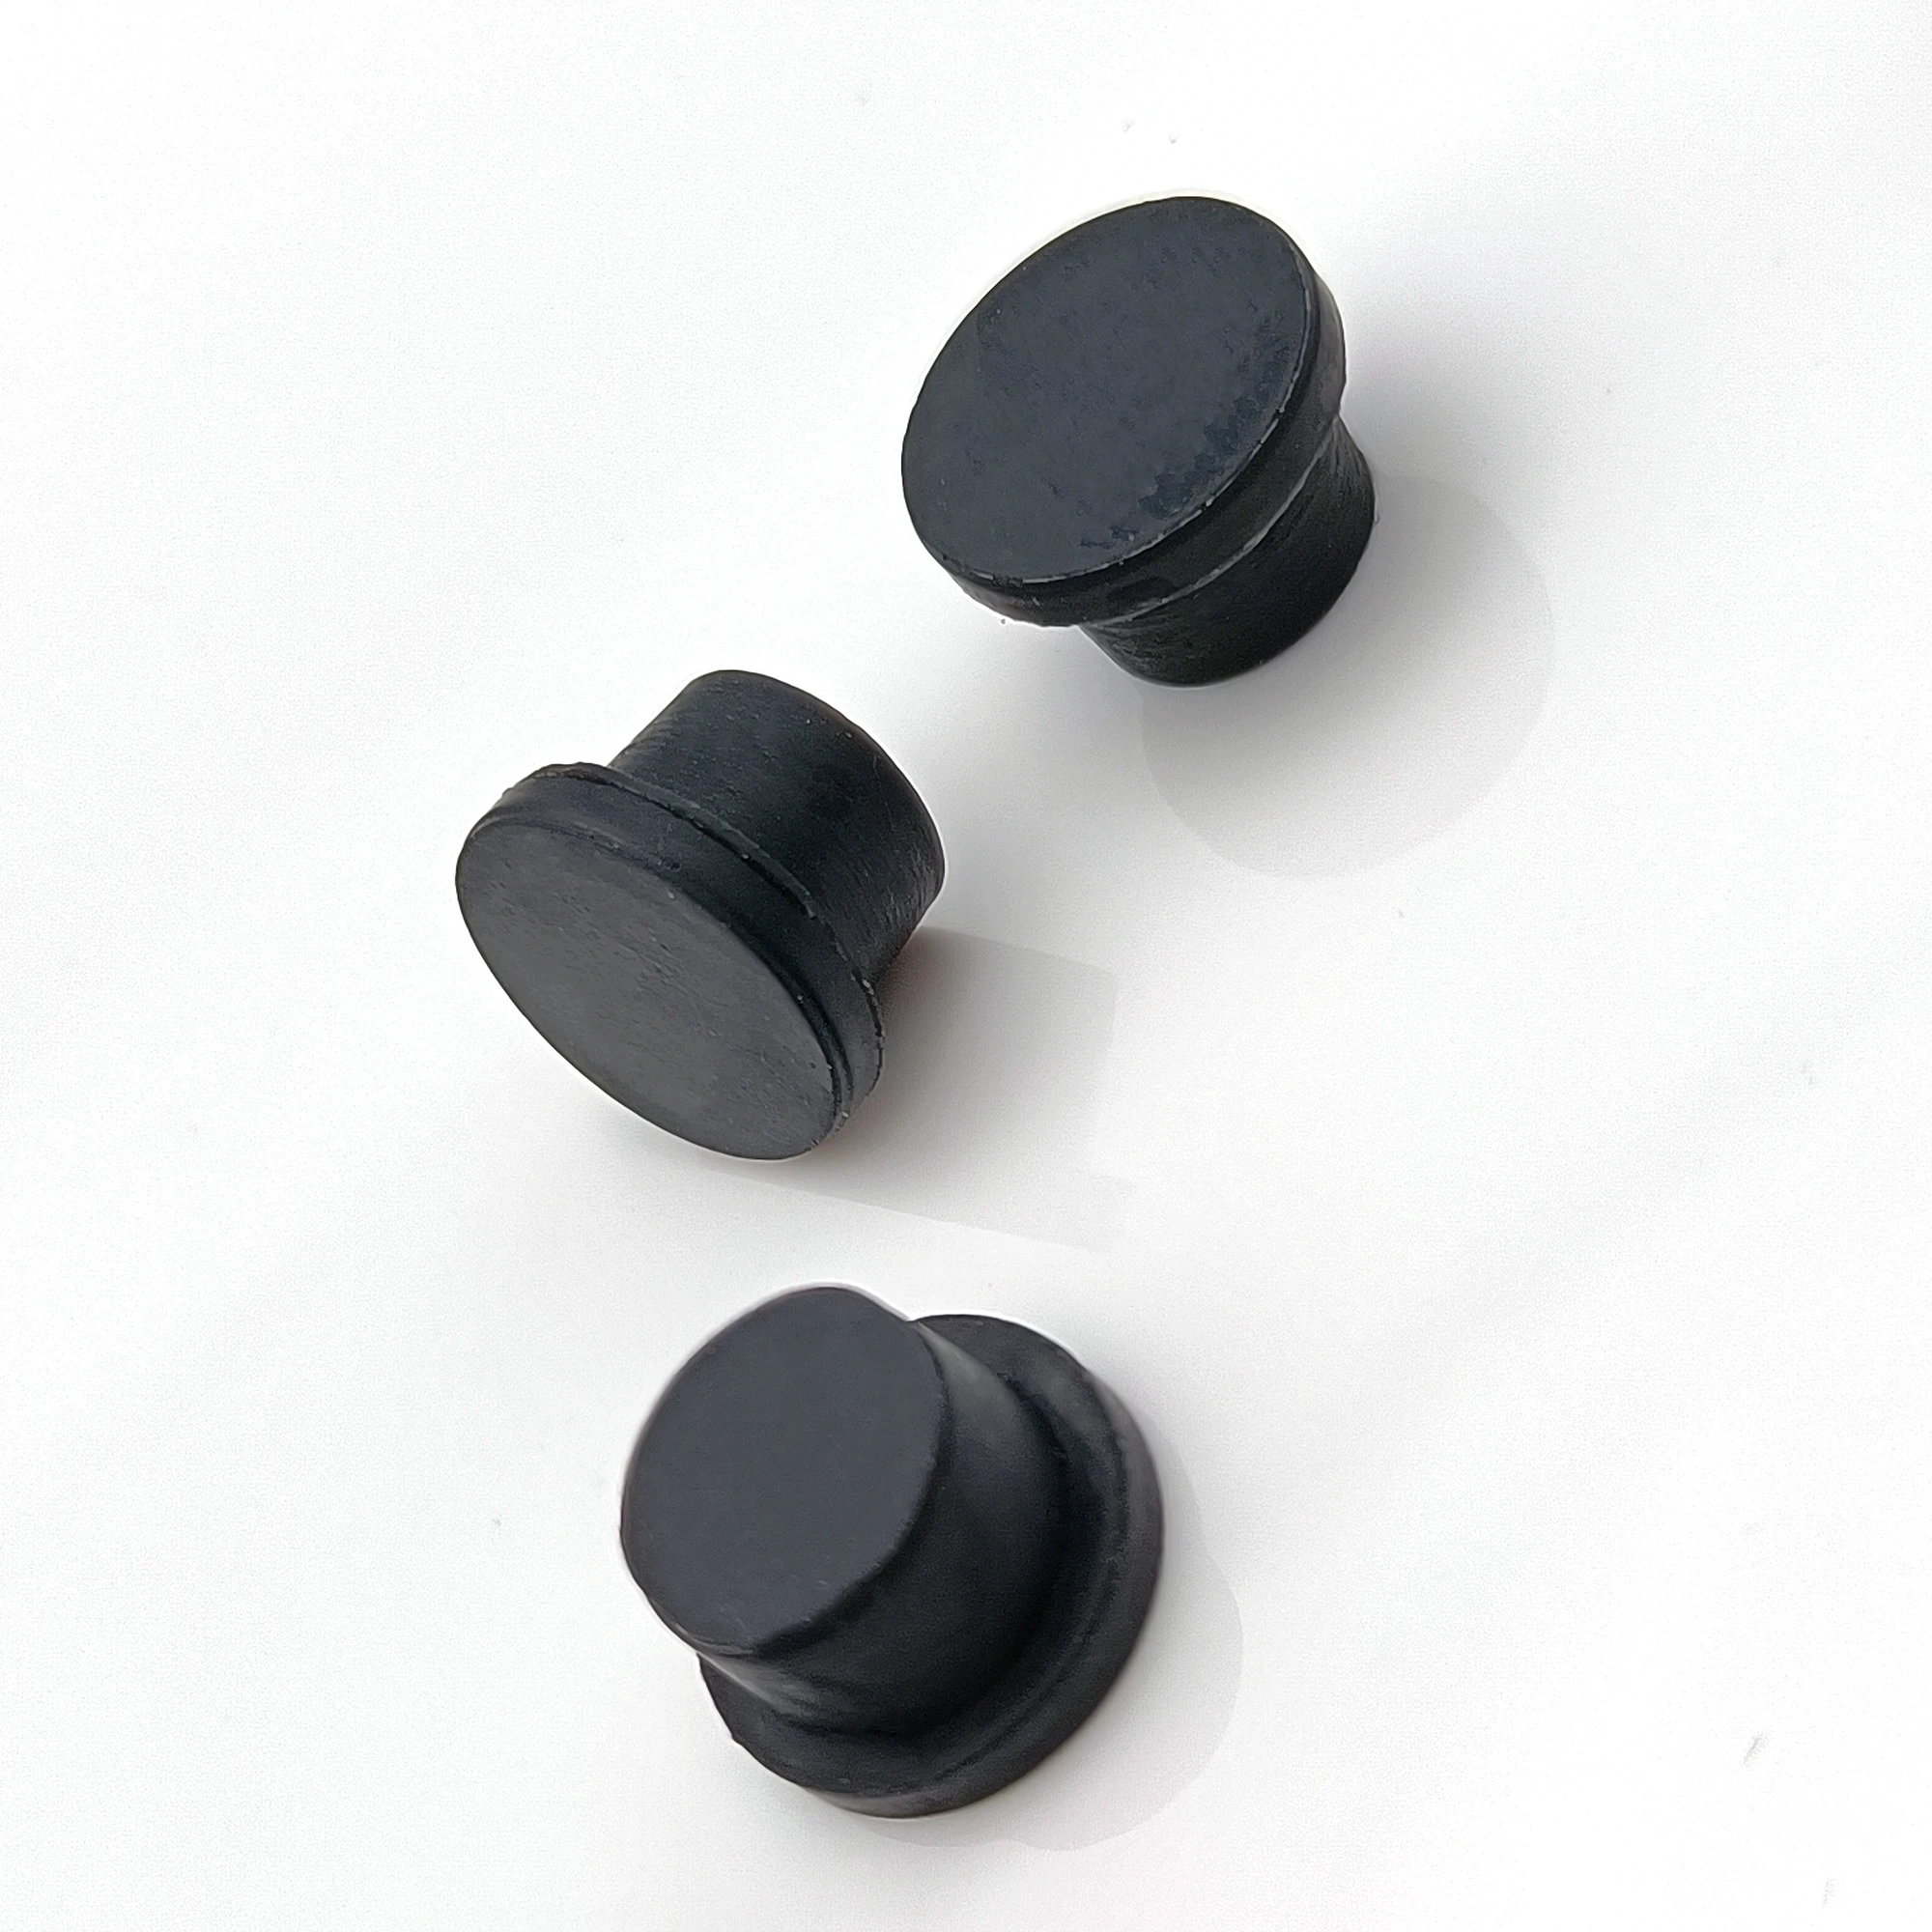 
China Manufacturer High Quality Silicone Rubber Stopper/rubber Cap/rubber Plug A-7.5 